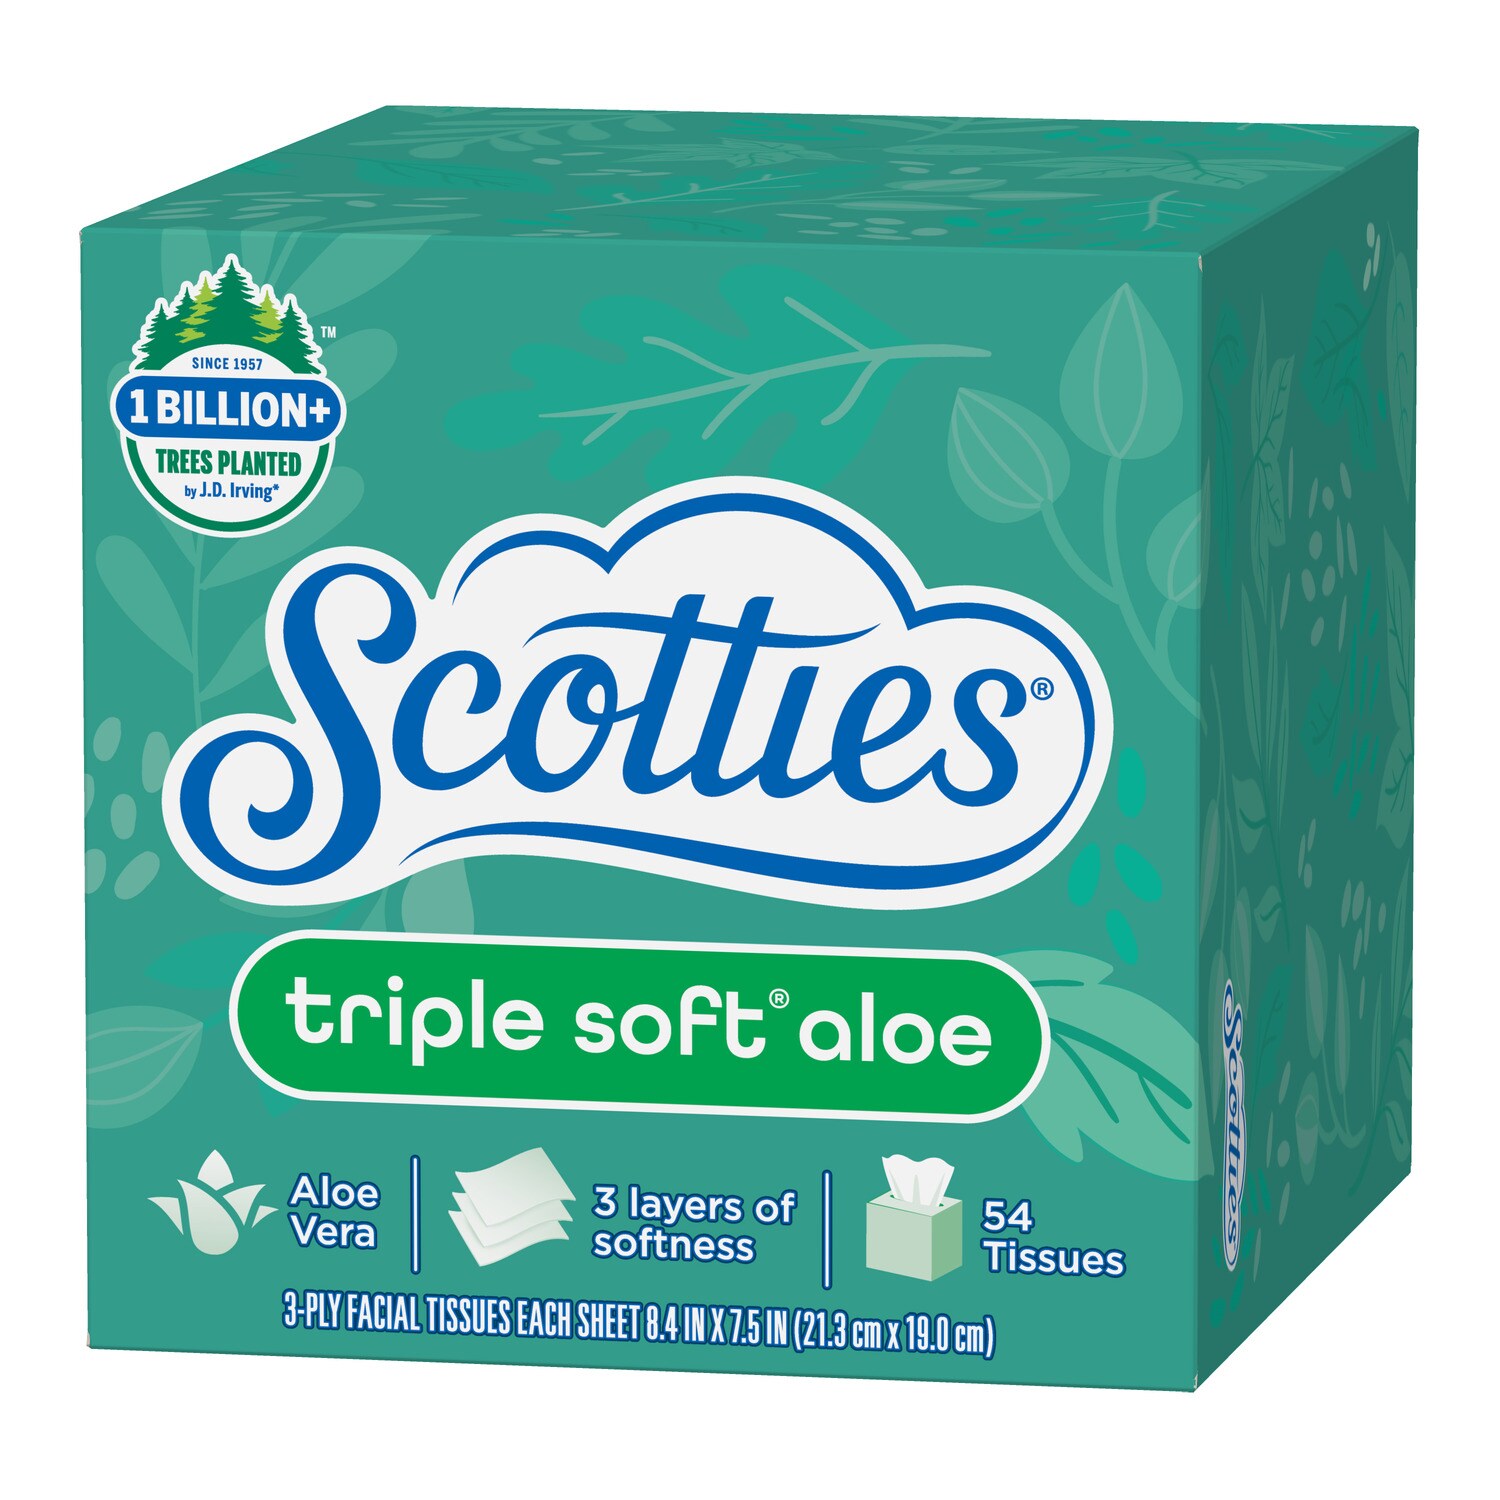 Scotties 3-Ply Facial Tissues.